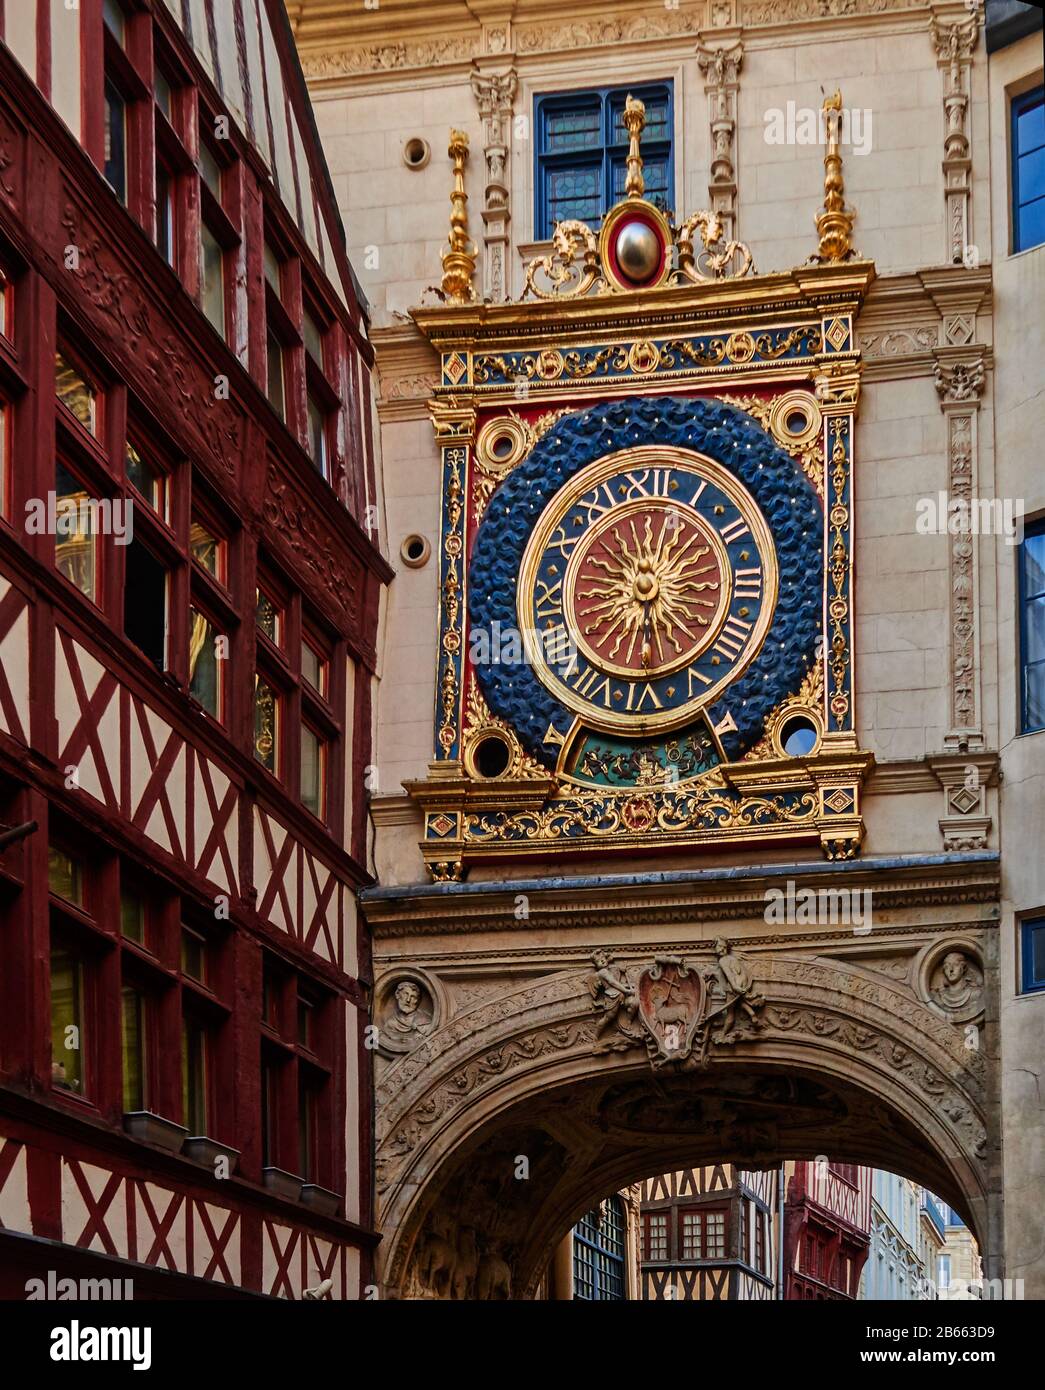 France, Normandy, , Seine Maritime Rouen, , Half-Timbered Buildings line the streets of the medieval city of Rouen, and The Gros Horloge – a 14th-century astronomical clock – decorates the center of Rouen, Stock Photo